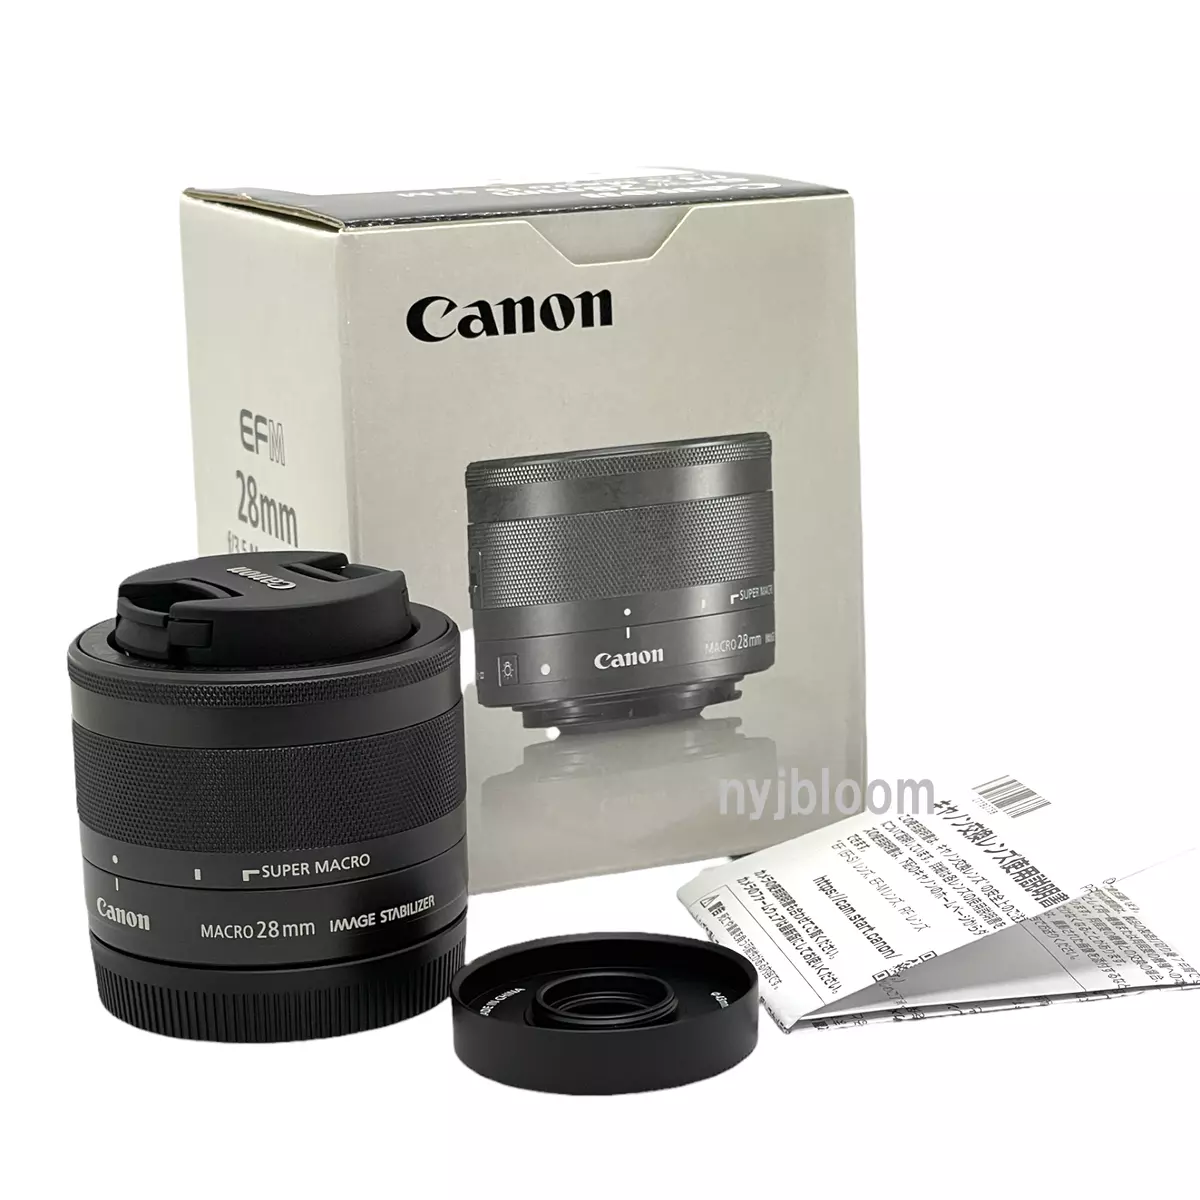 New Canon EF-M 28mm F3.5 Macro IS STM Lens for M Series Mirrorless